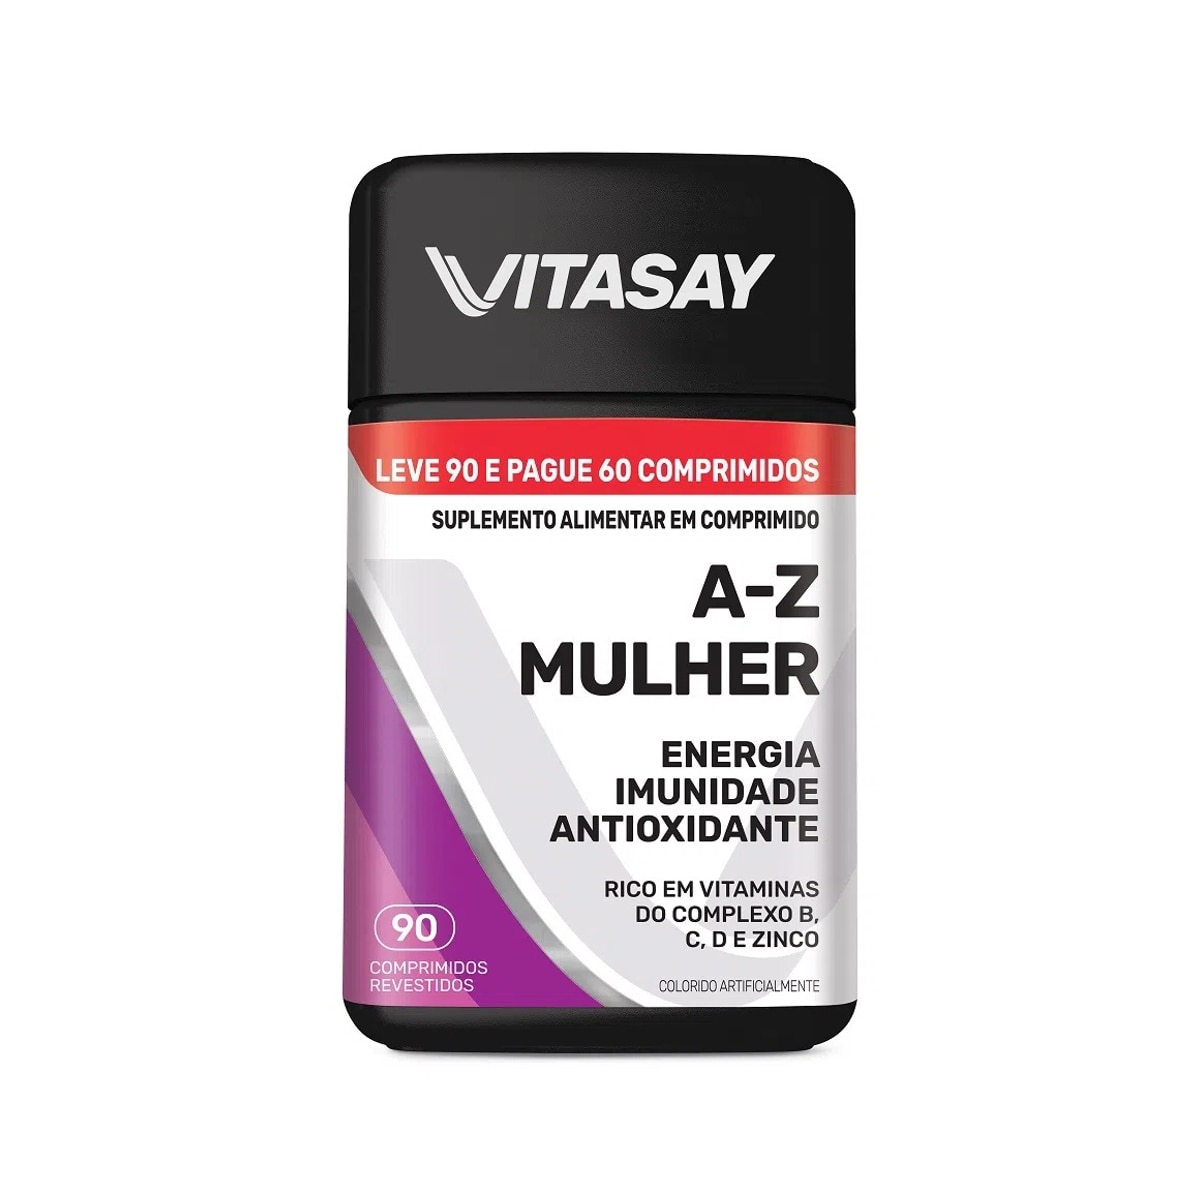 Vitasay A-Z Mulher Leve 90 Pague 60 Comprimidos Revestidos